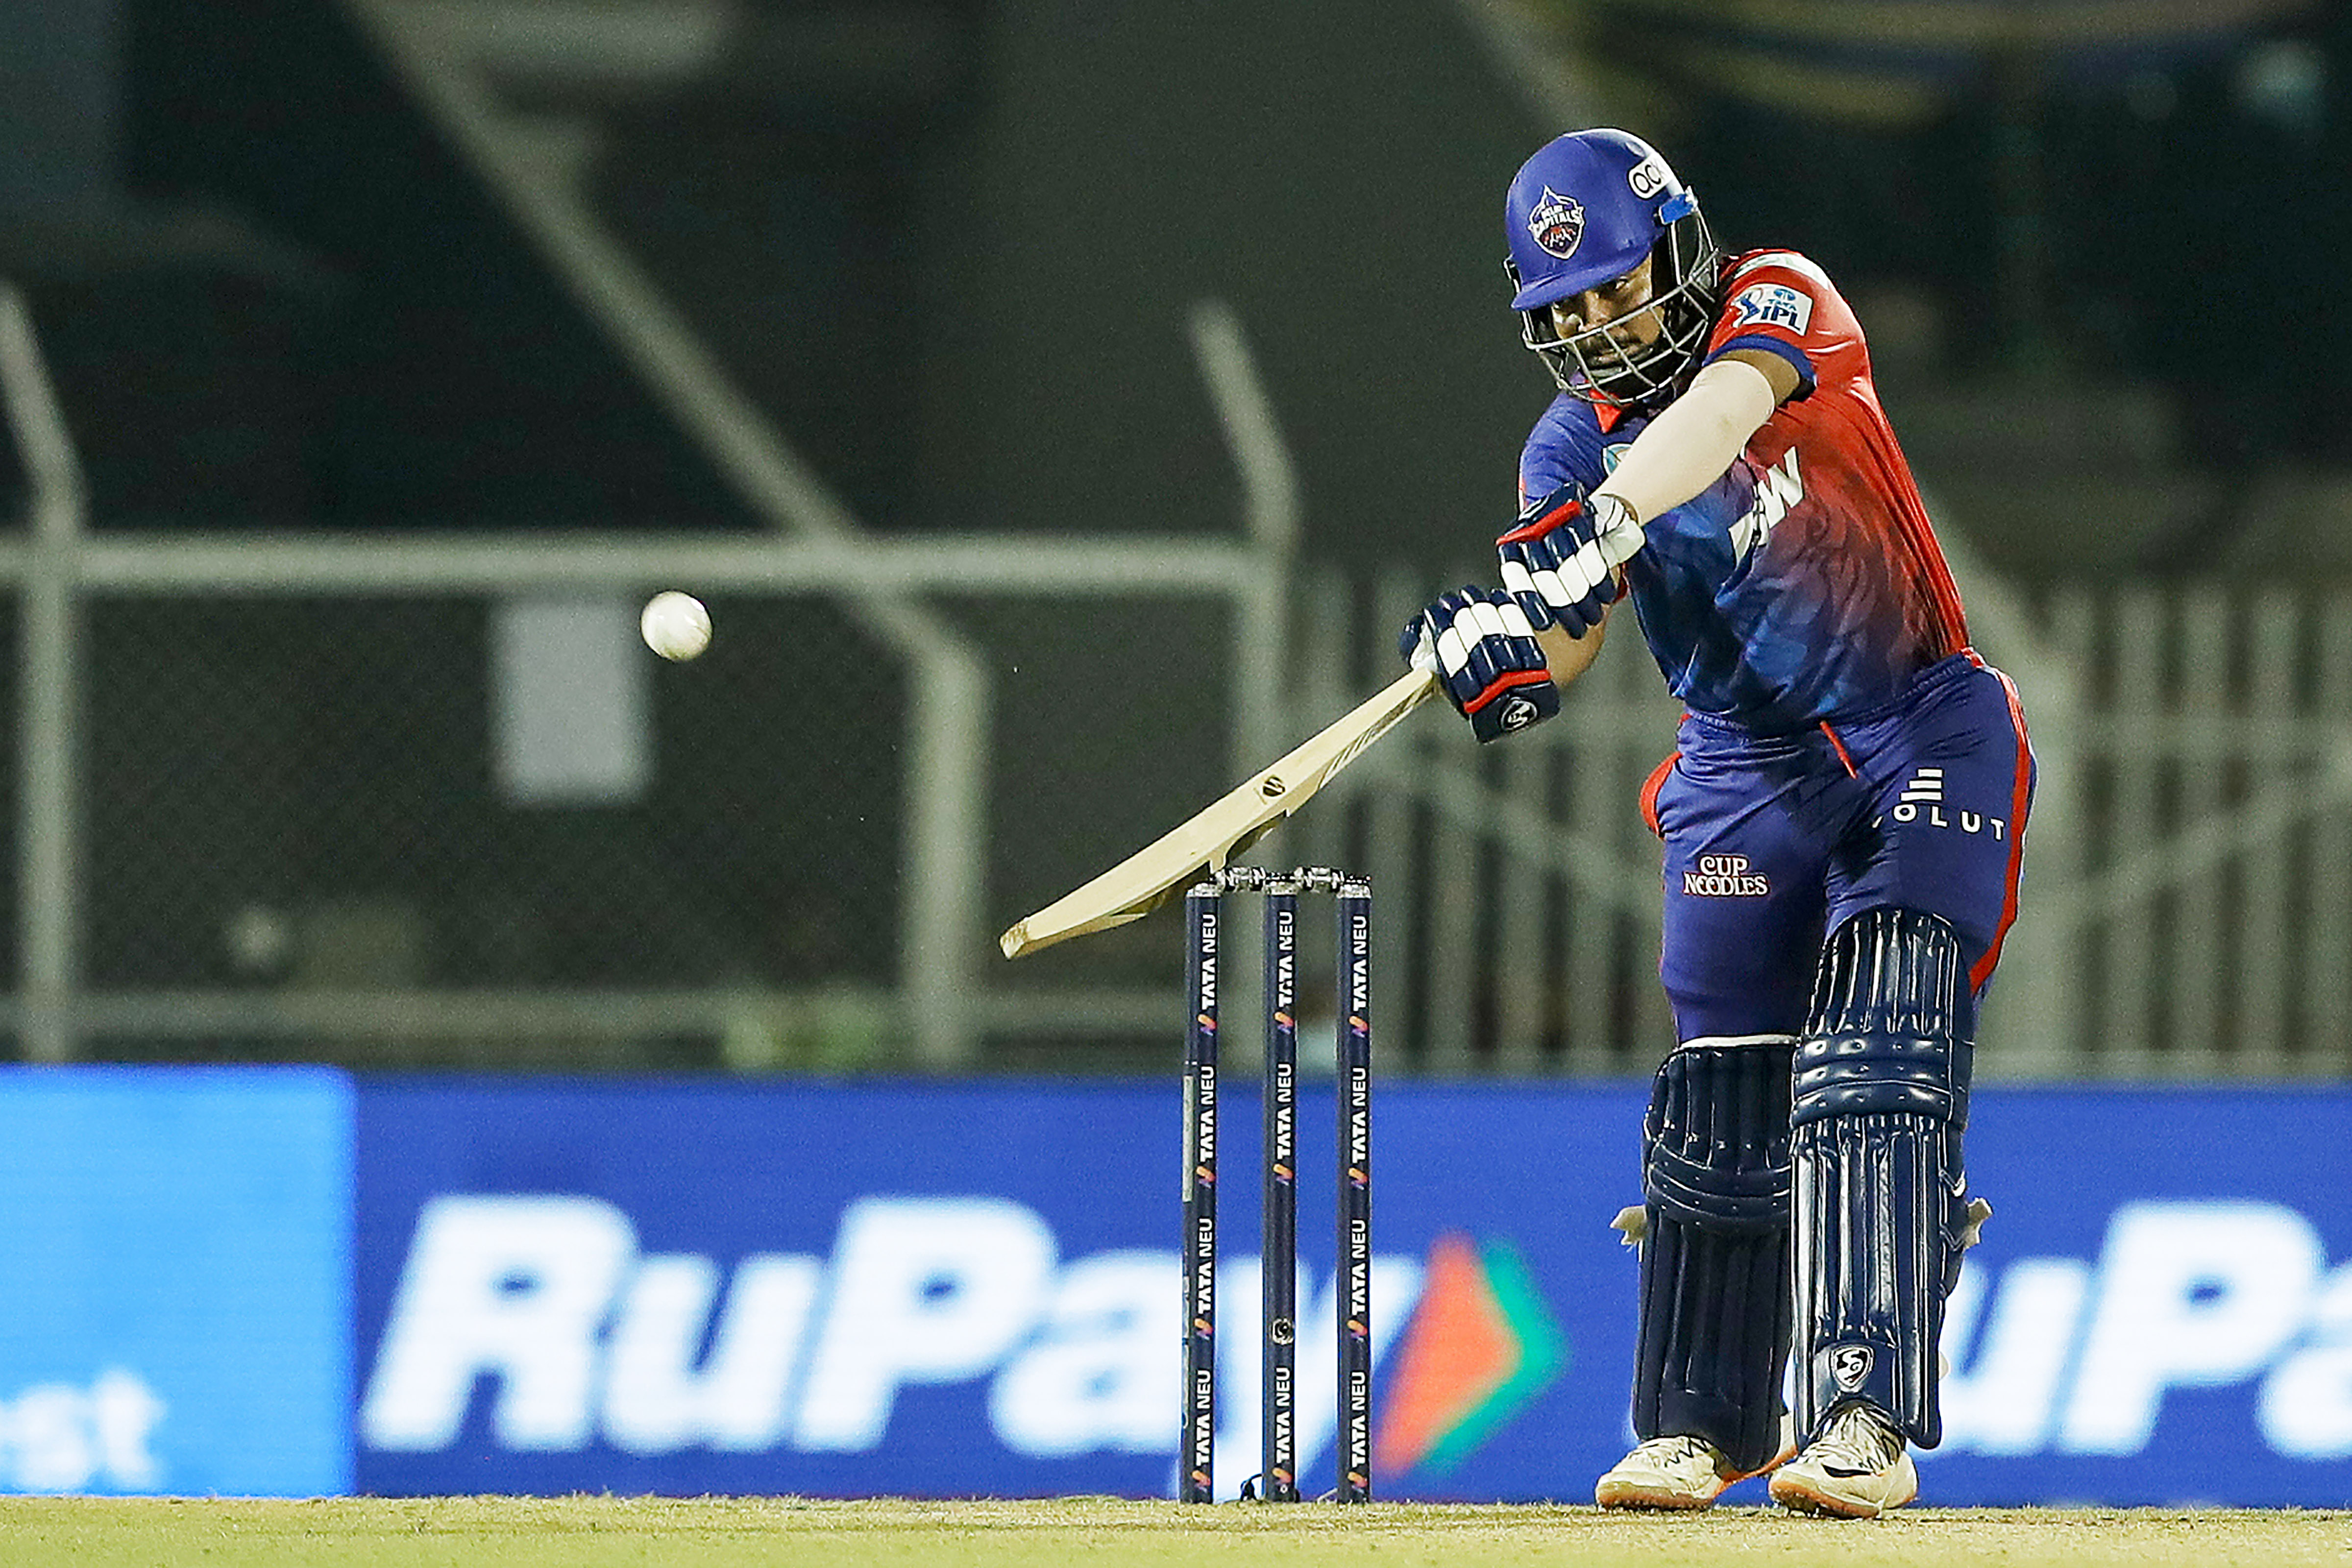 COVID-stricken Delhi Capitals demolish Punjab Kings riding on superb show from spinners